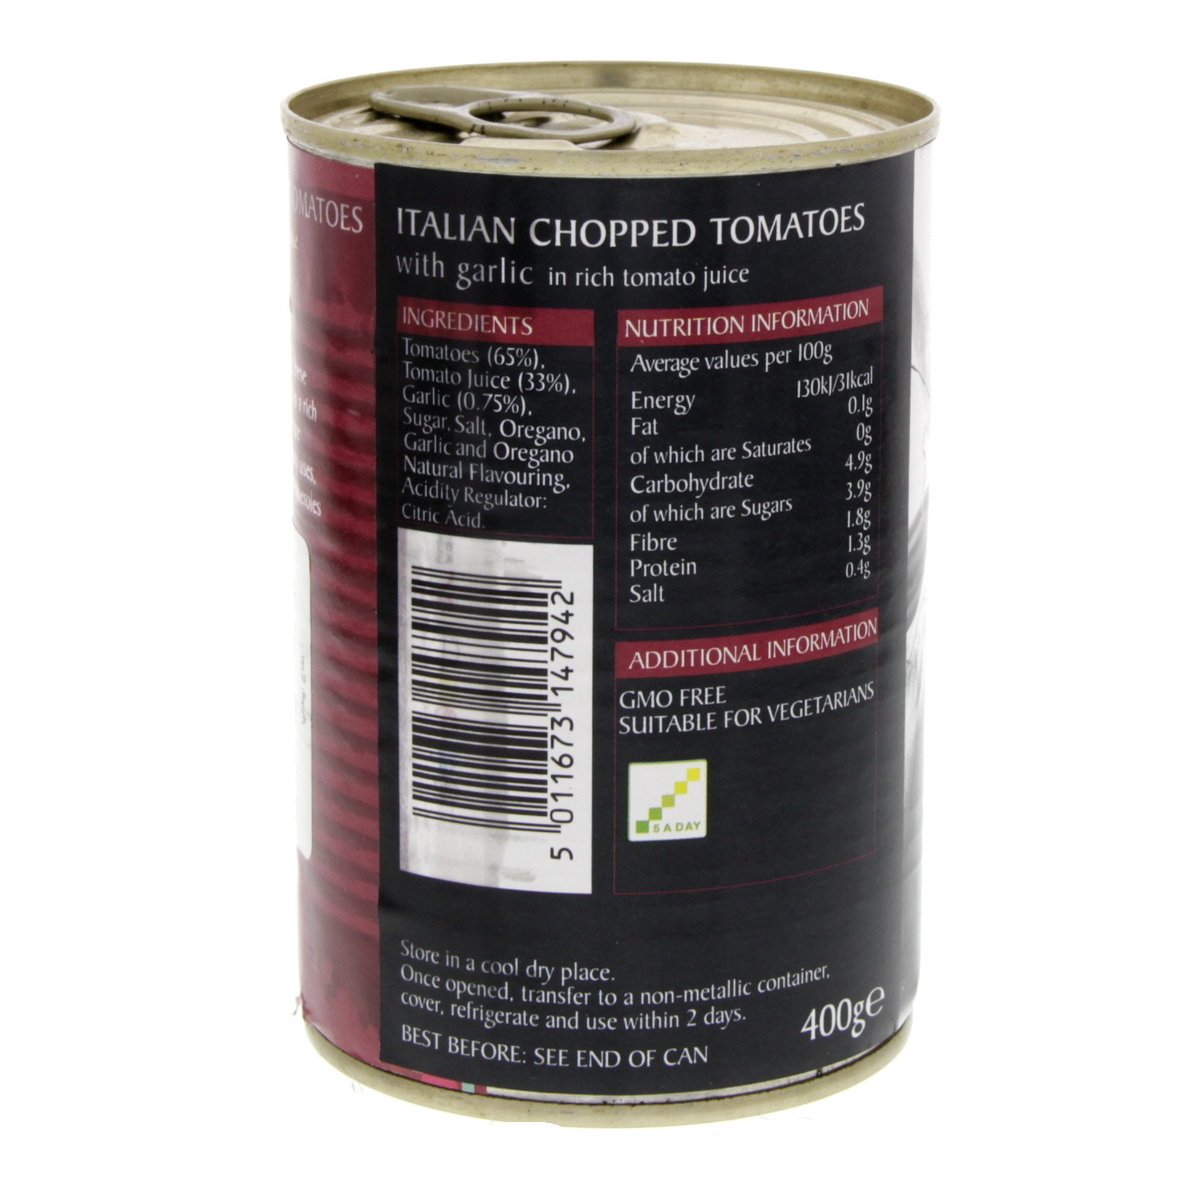 Epicure Italian Chopped Tomatoes With Garlic In Rich Tomato Juice 400 g